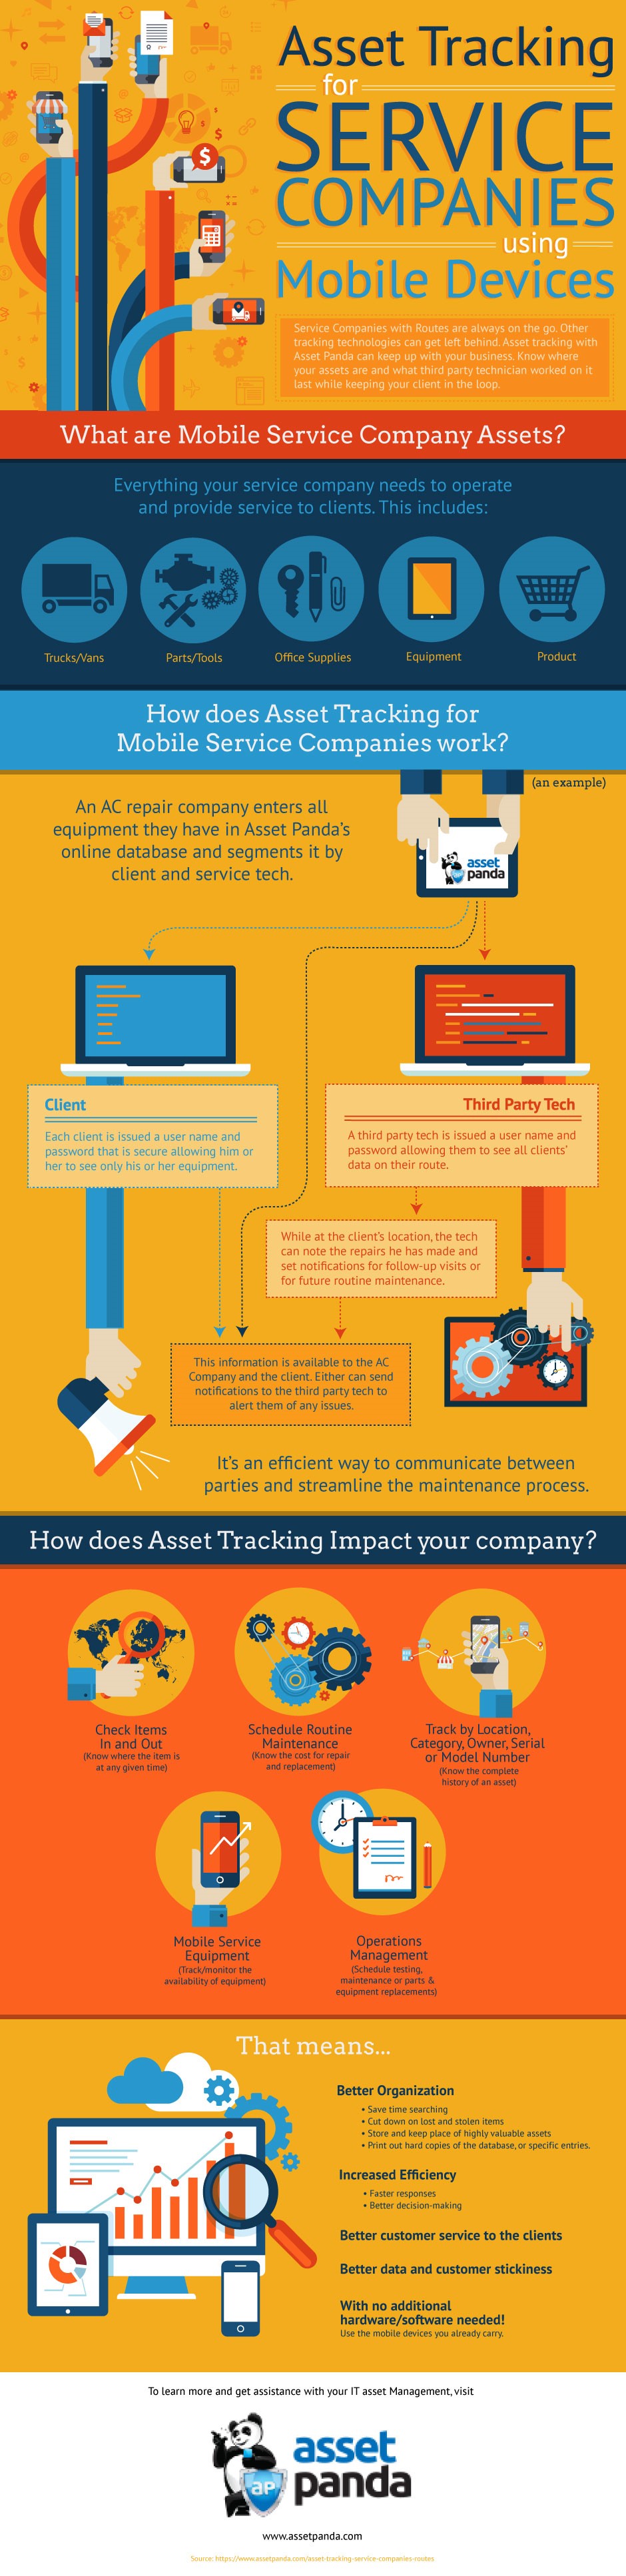 Asset Tracking for Service Companies Using Mobile Devices